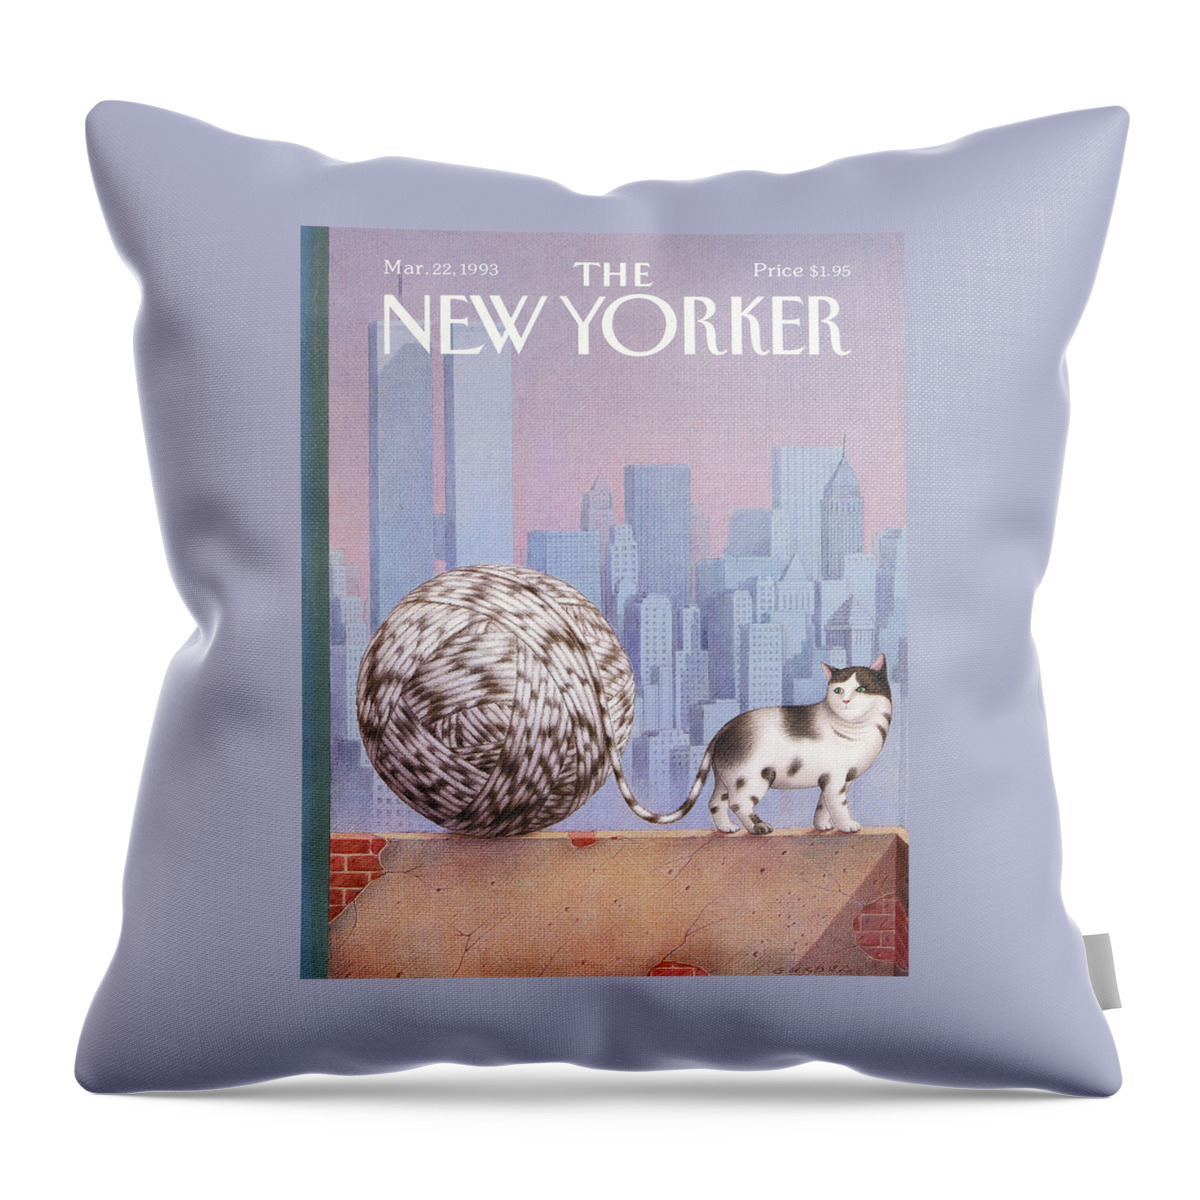 New Yorker March 22, 1993 Throw Pillow